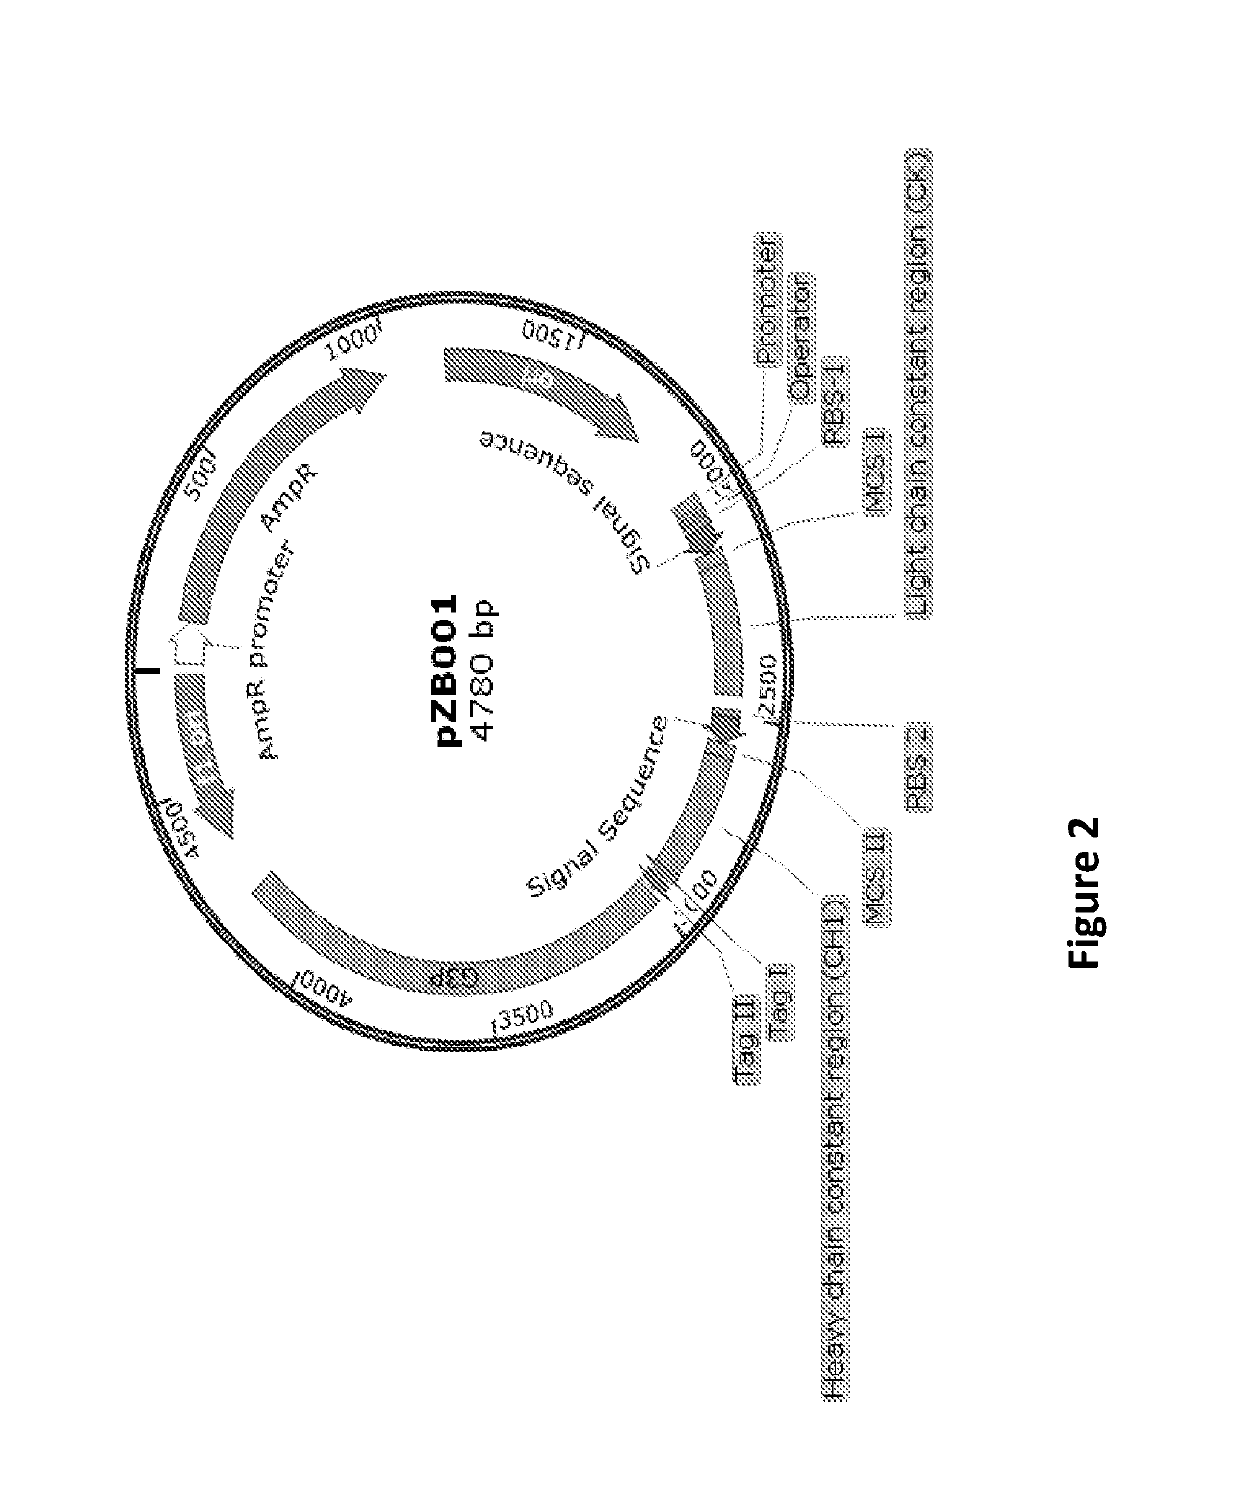 Vectors for cloning and expression of proteins, methods and applications thereof